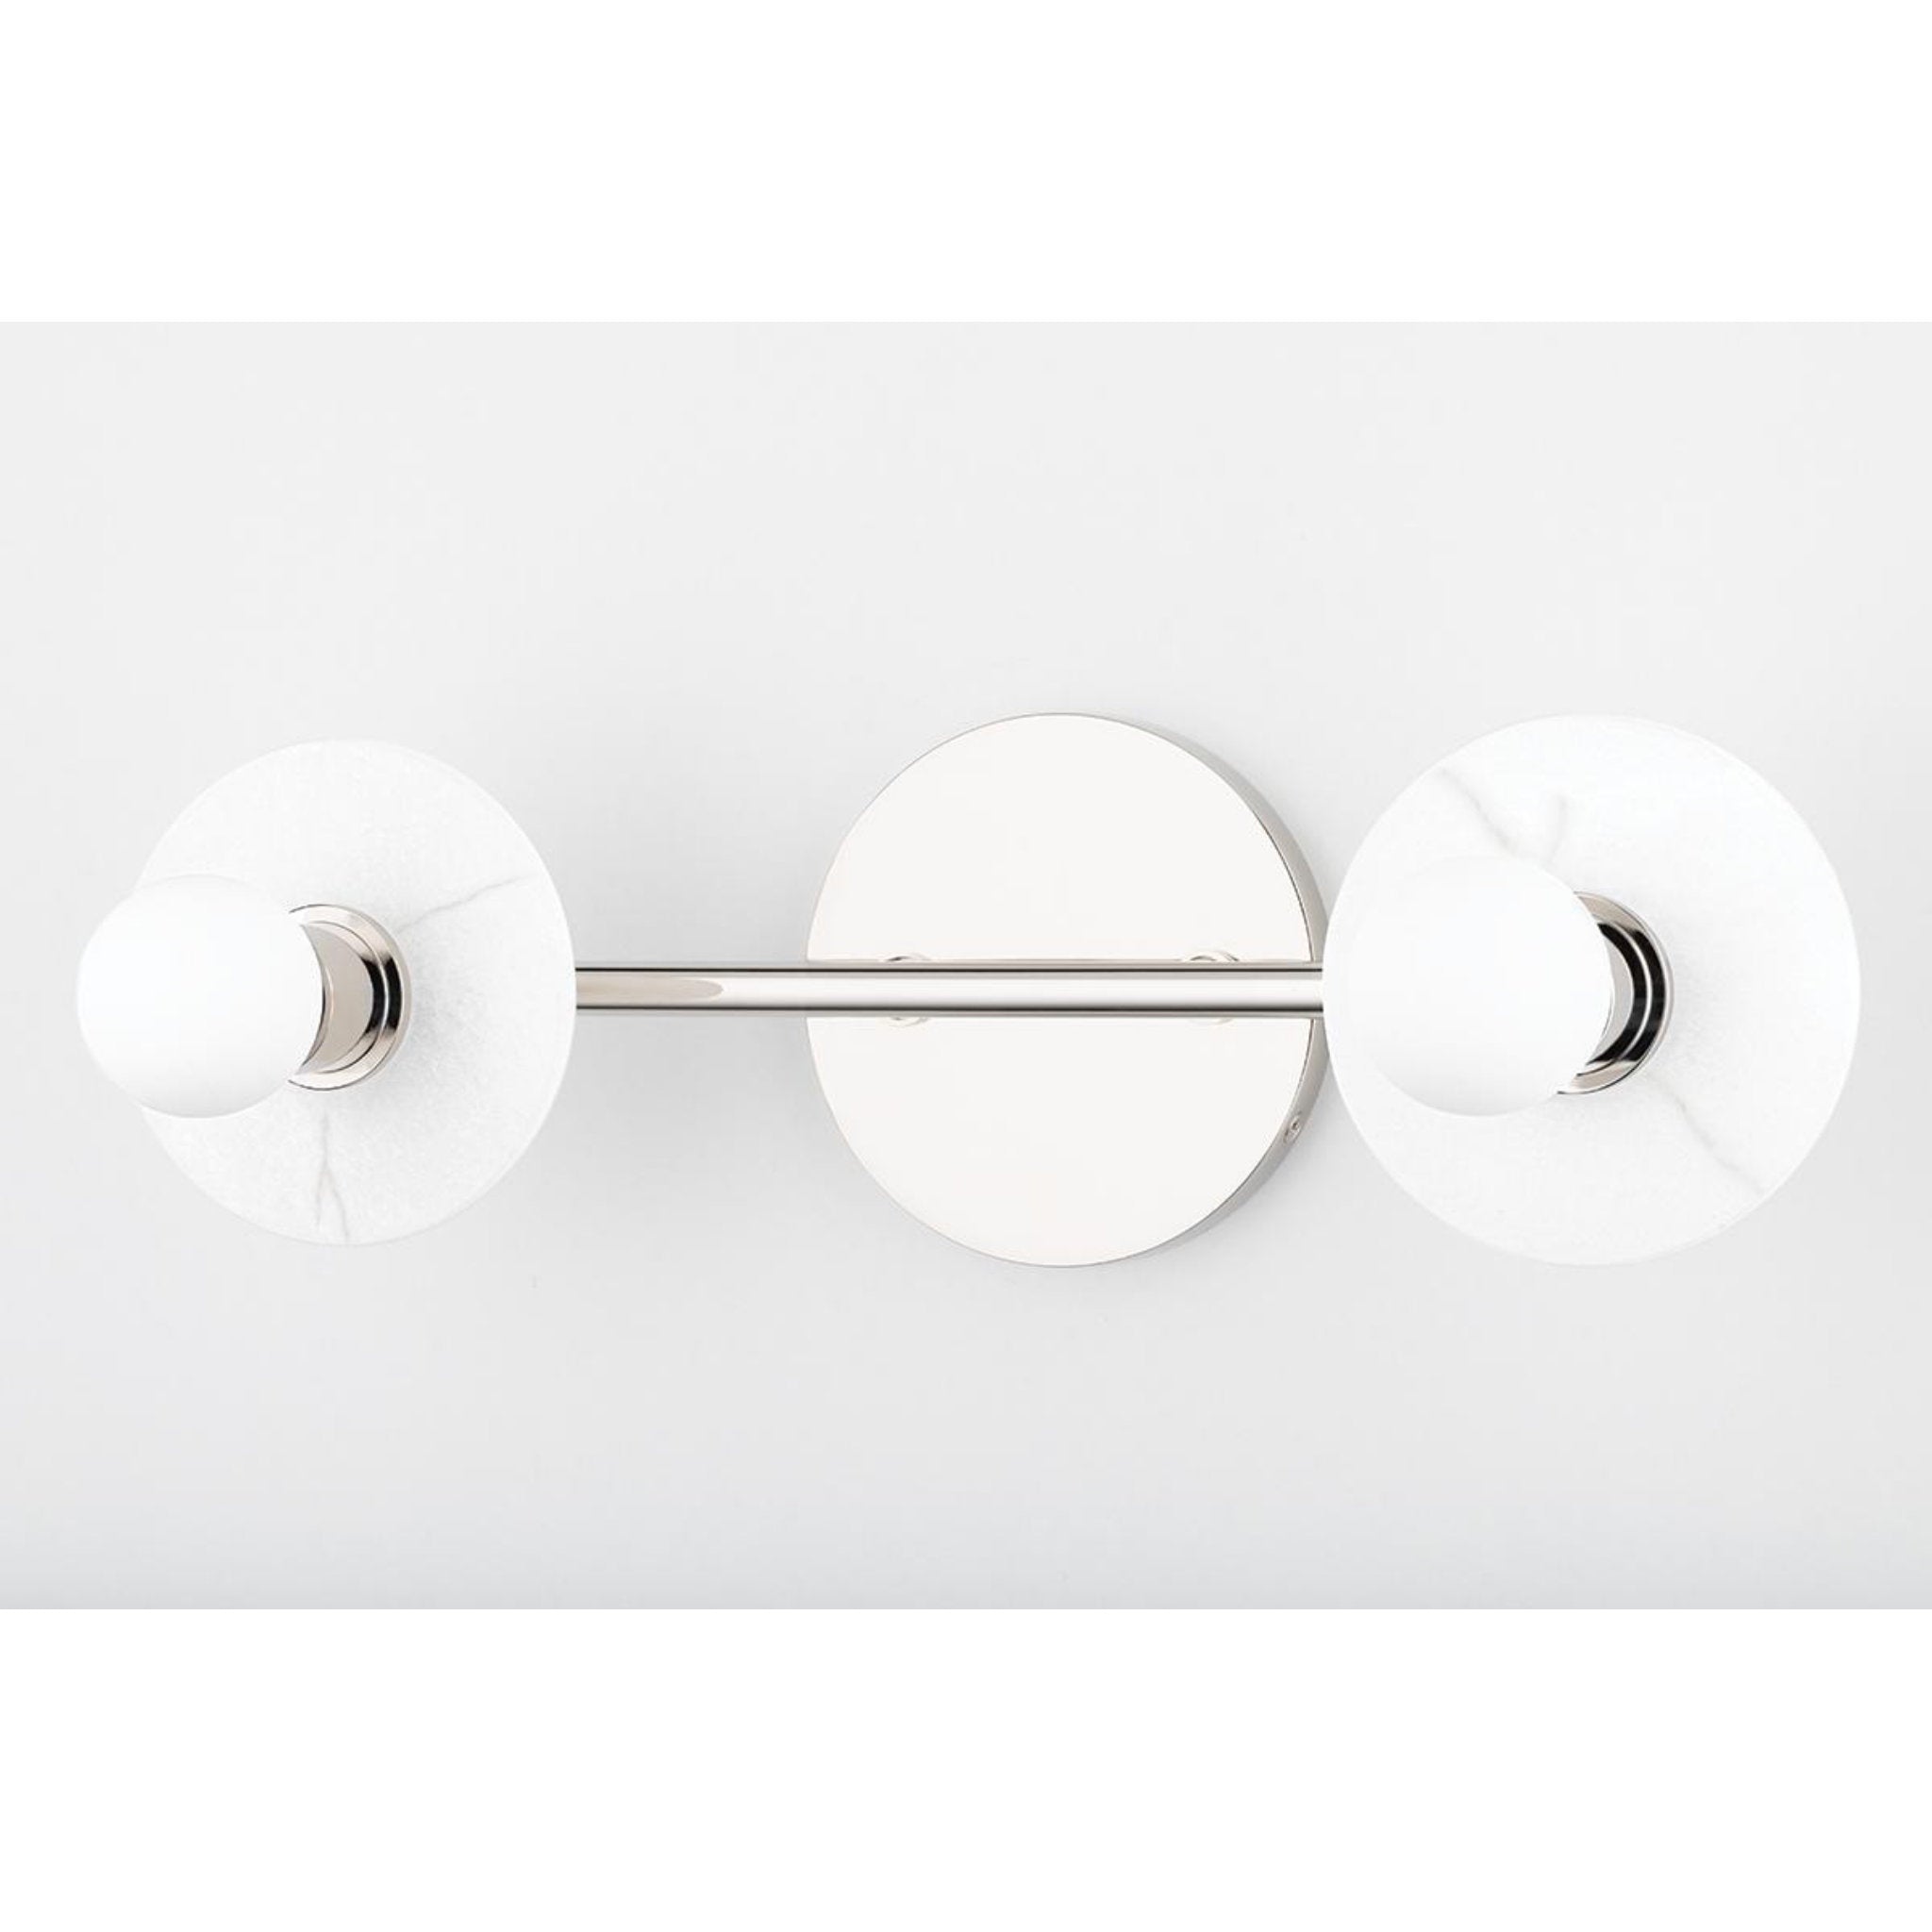 Elmont 2 Light Bath and Vanity in Polished Nickel